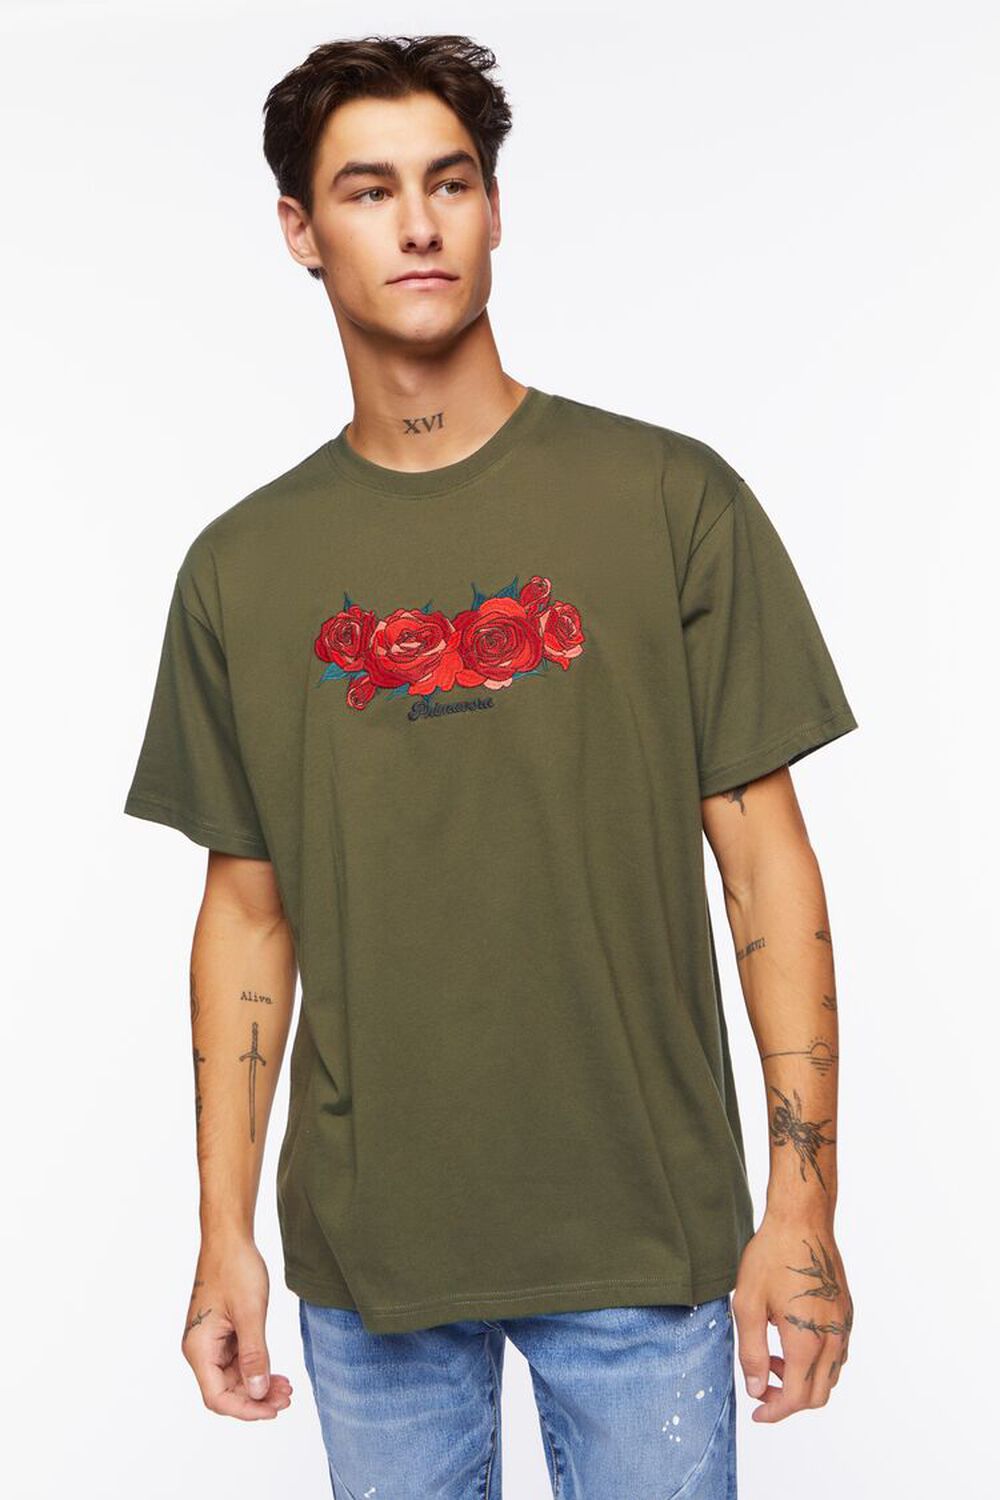 OLIVE/RED Embroidered Primavera Rose Graphic Tee, image 1